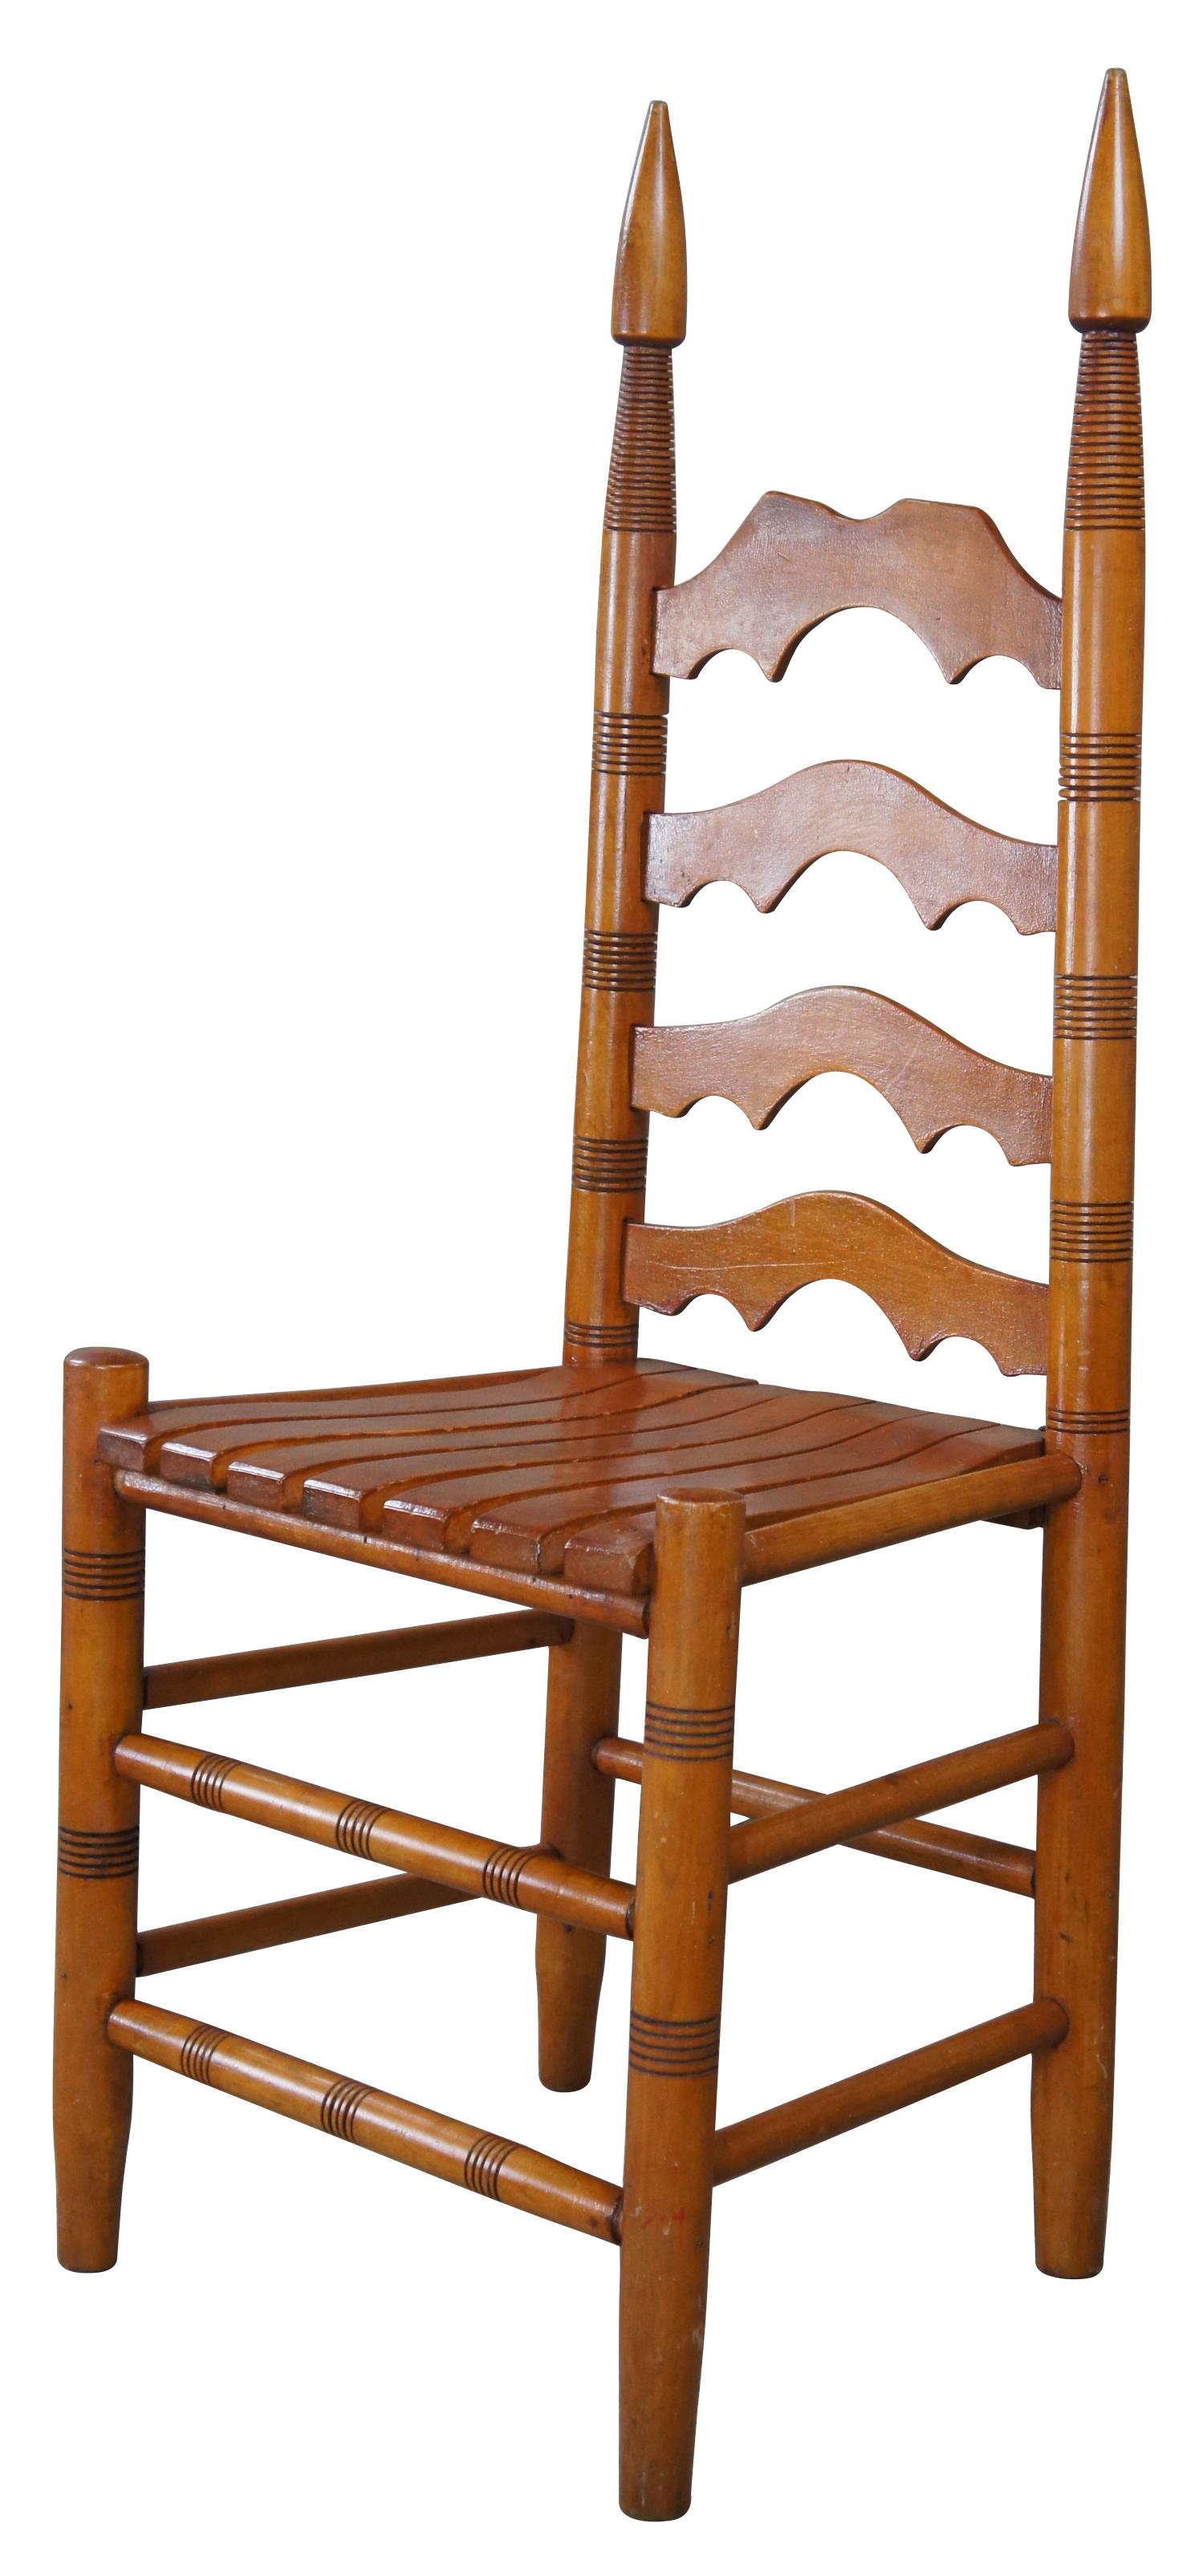 20th century arts & crafts side chair. Made from oak with a serpentine ladder back. Features ripped stiles, spire finials and a slatted seat. Legs are turned with ribbed stretchers.